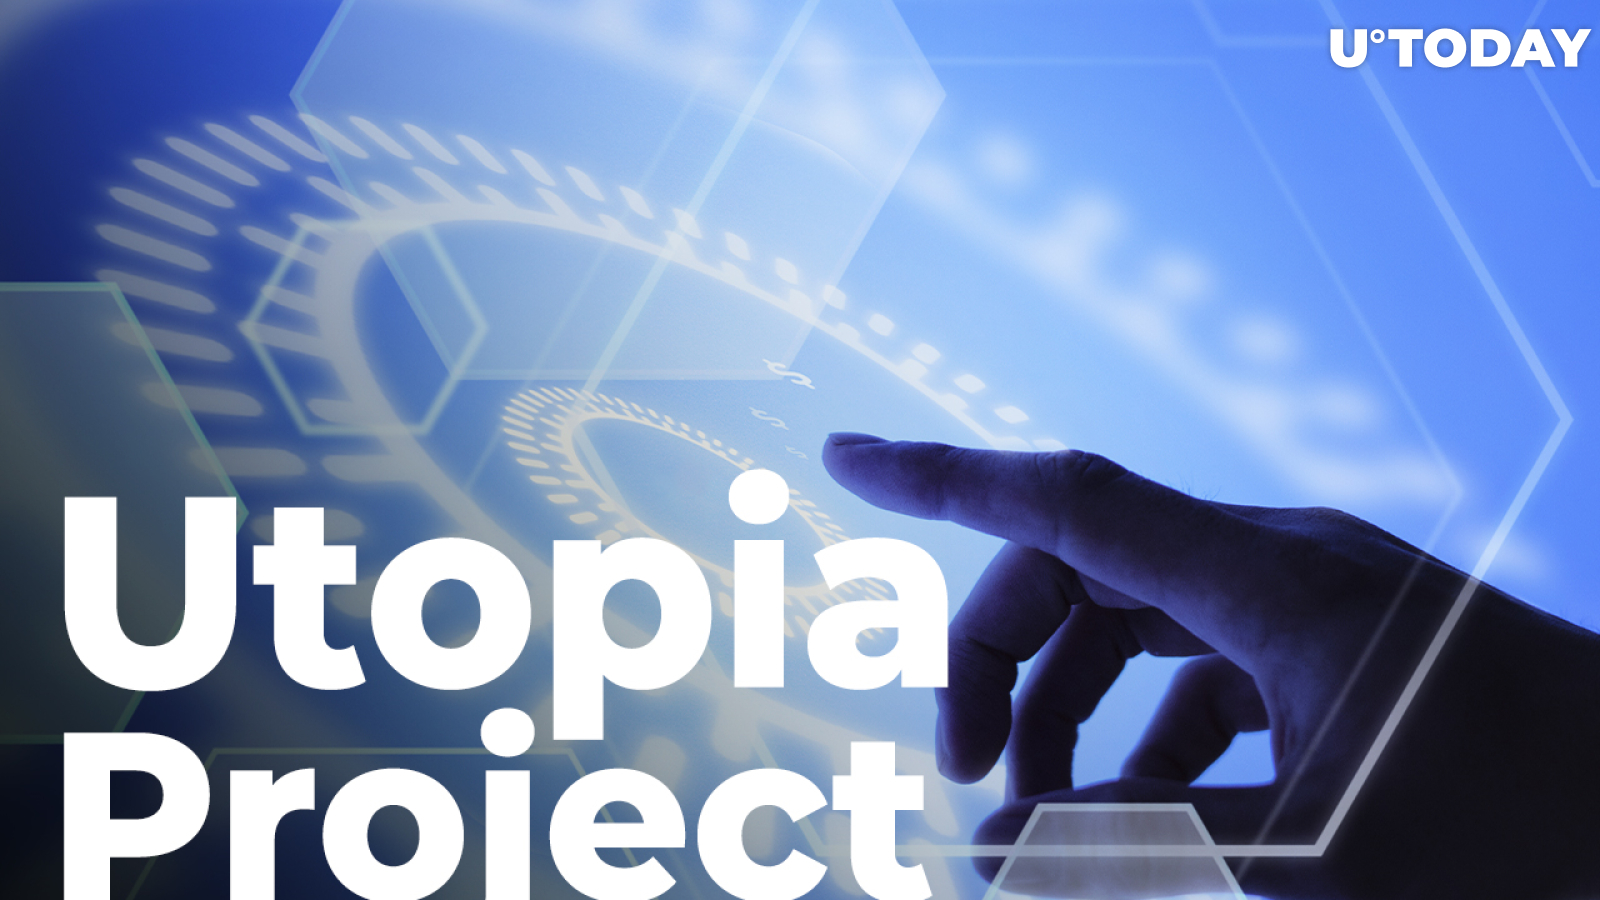 Utopia Project Releases All-in-One Ecosystem with Messenger, Mail Client and Crypto Wallet: Review